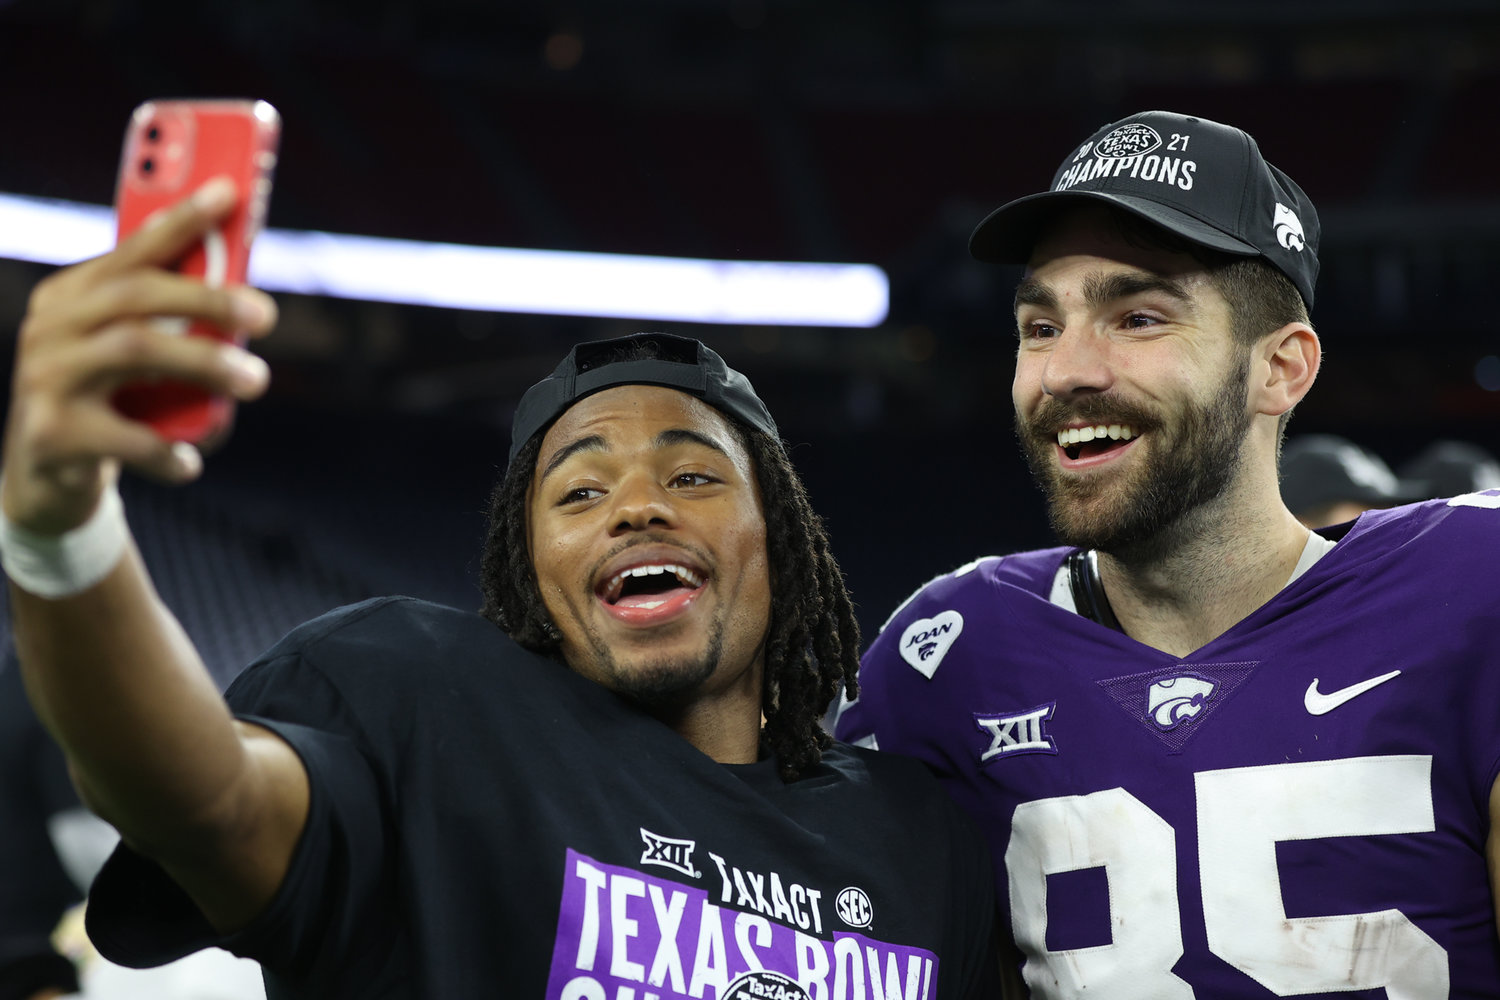 Kansas State Wildcats wide receiver Kade Warner (85) joins in the celebration after a 42-20 win over LSU in the TaxAct Texas Bowl on Jan. 4, 2022 in Houston, Texas.